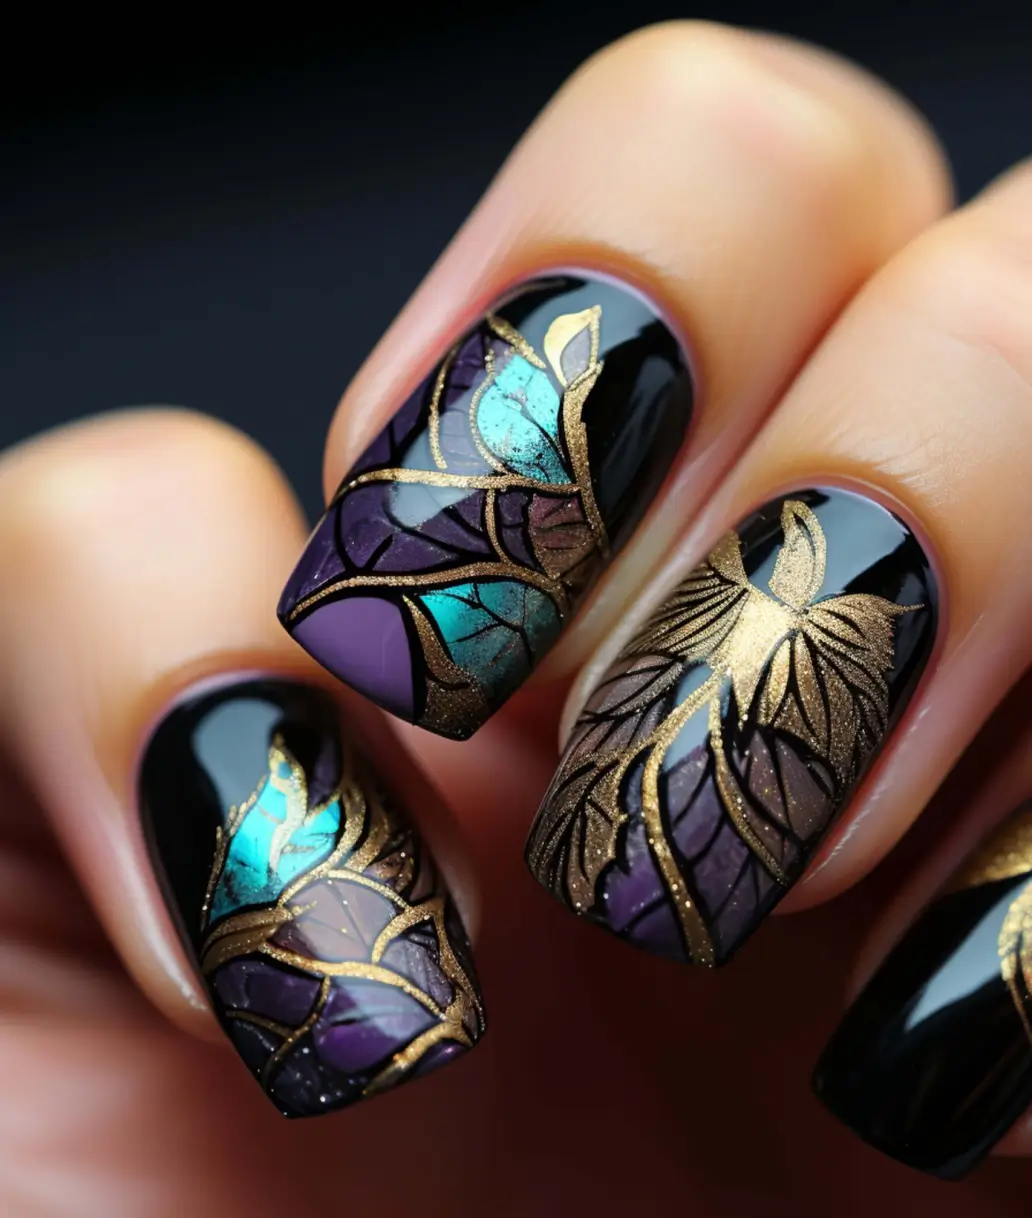 close-up-person-holding-black-gold-manicure